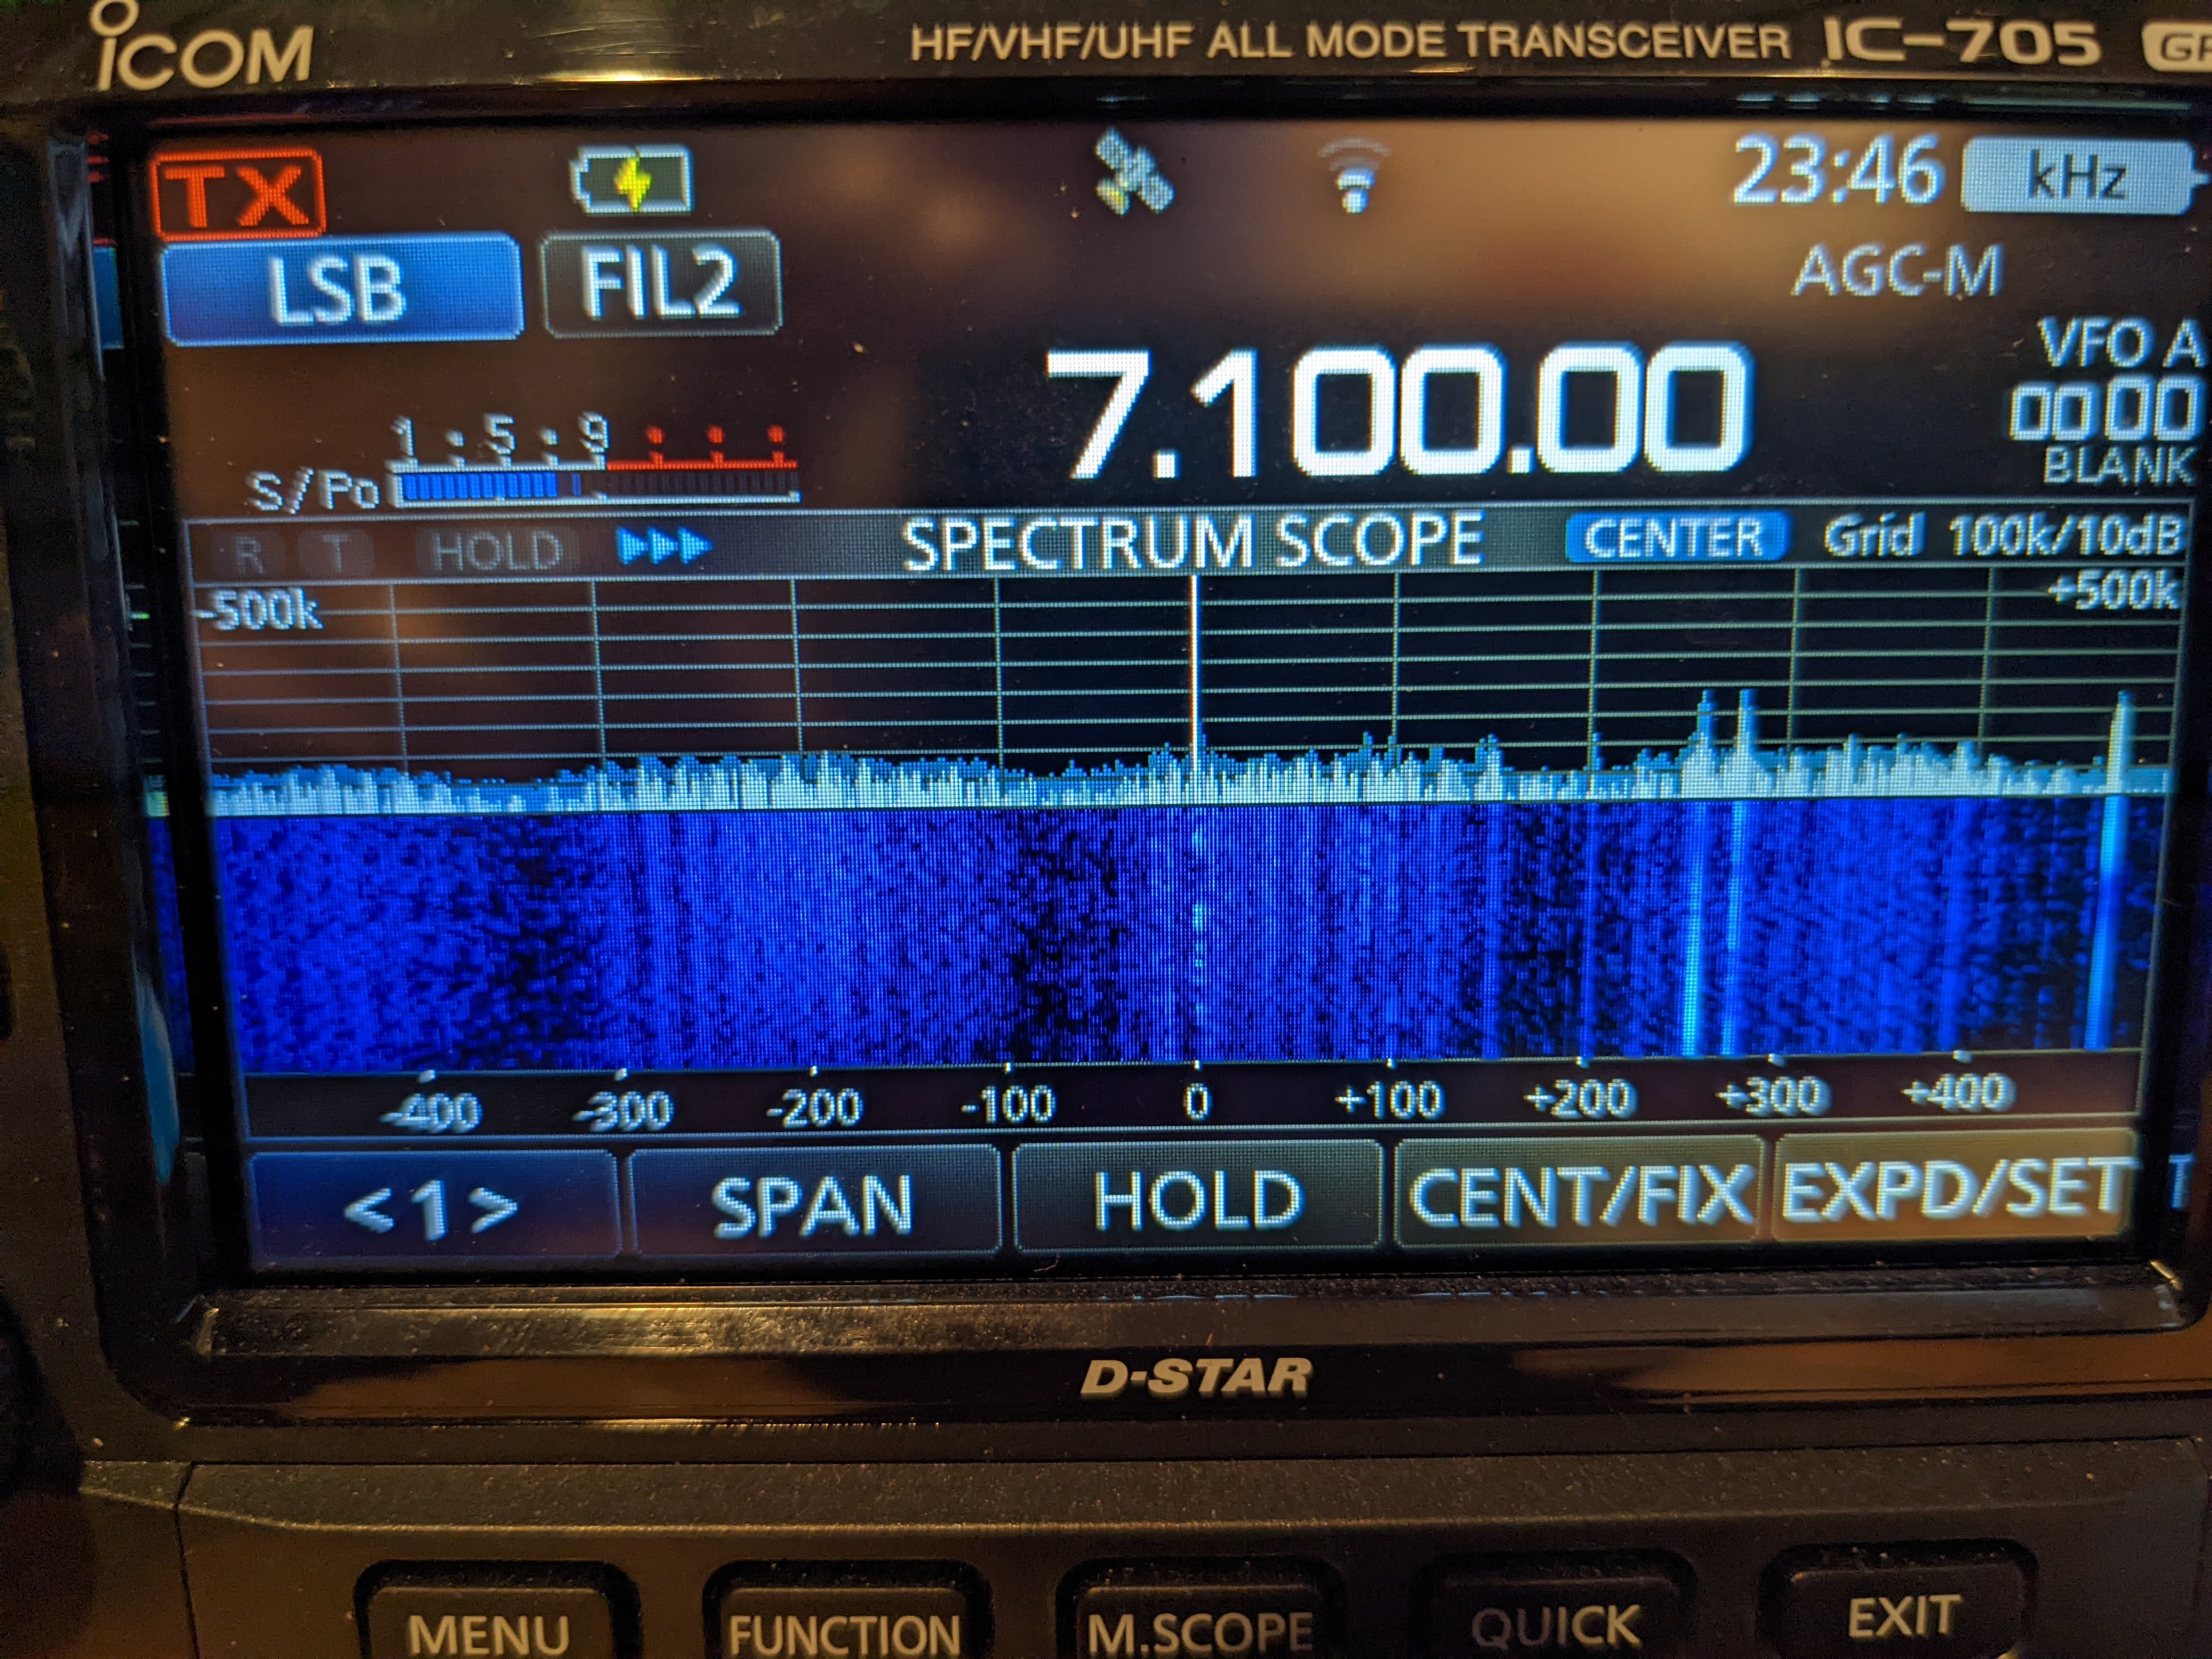 SMPS Hash on 40M